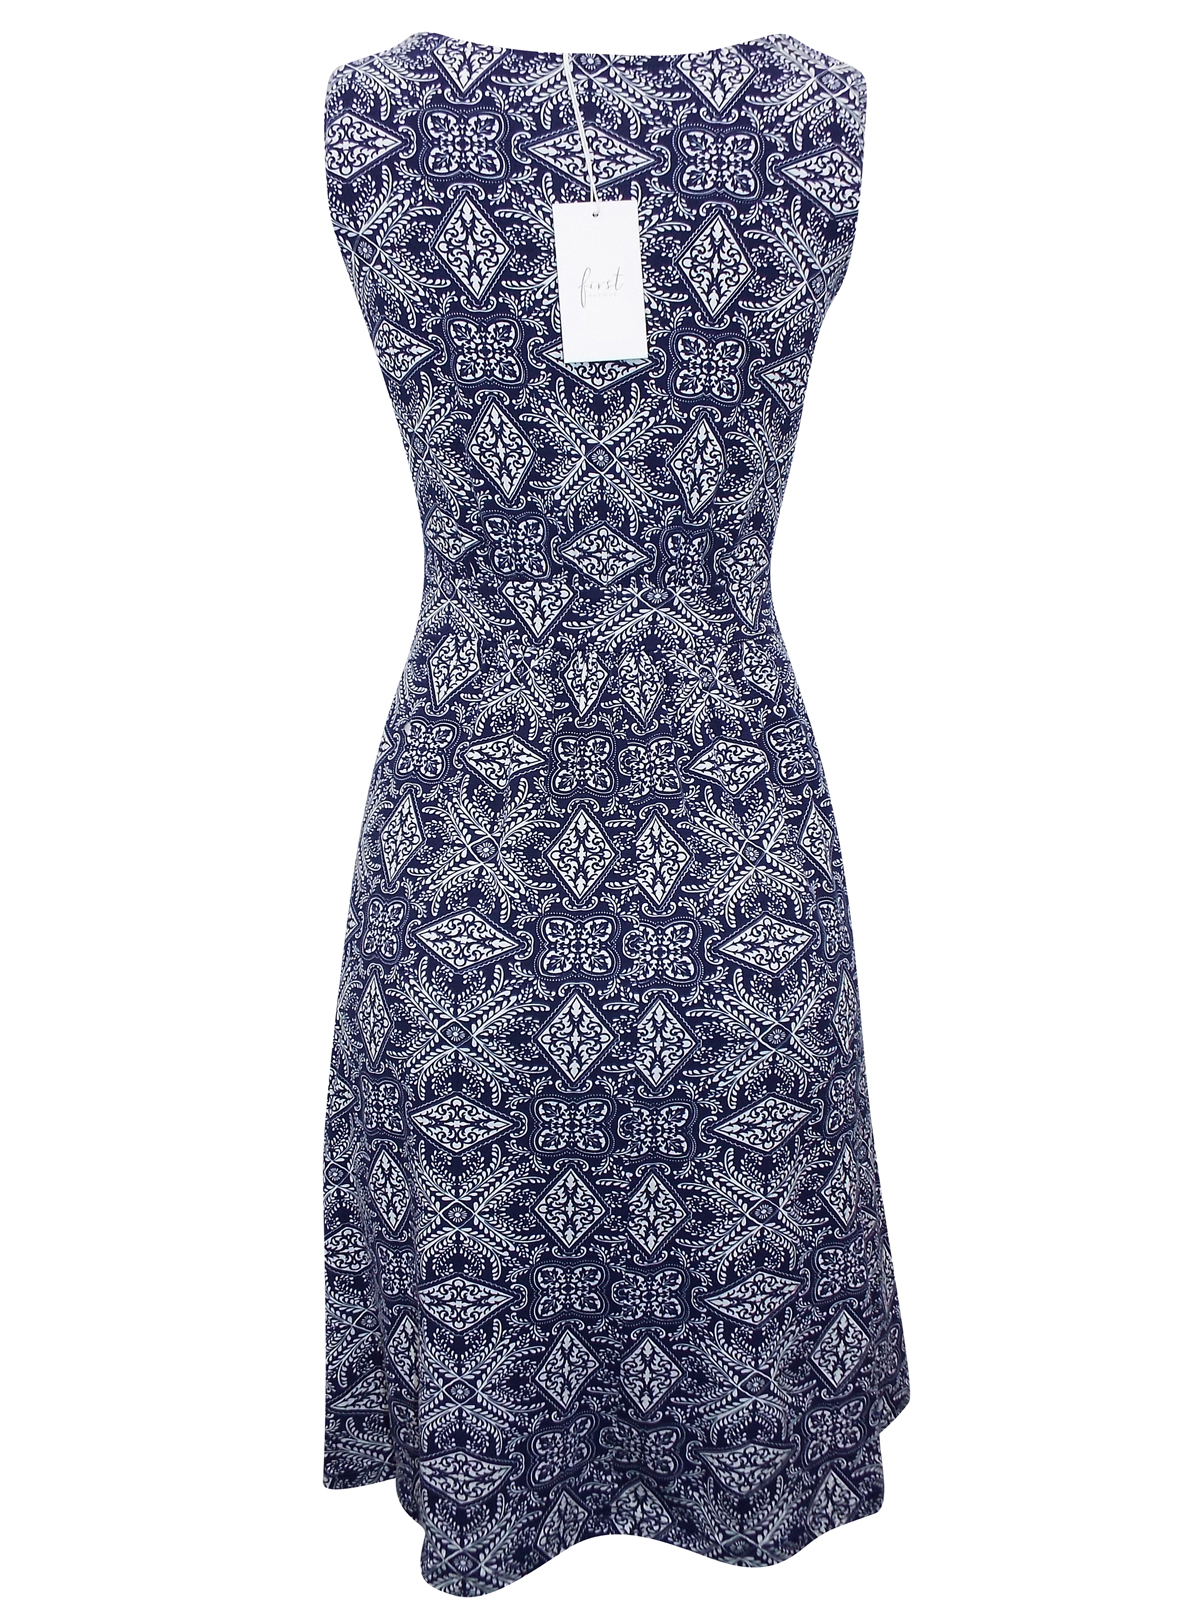 First Avenue Navy Tile Print Sleeveless Printed Jersey Dress Size 10